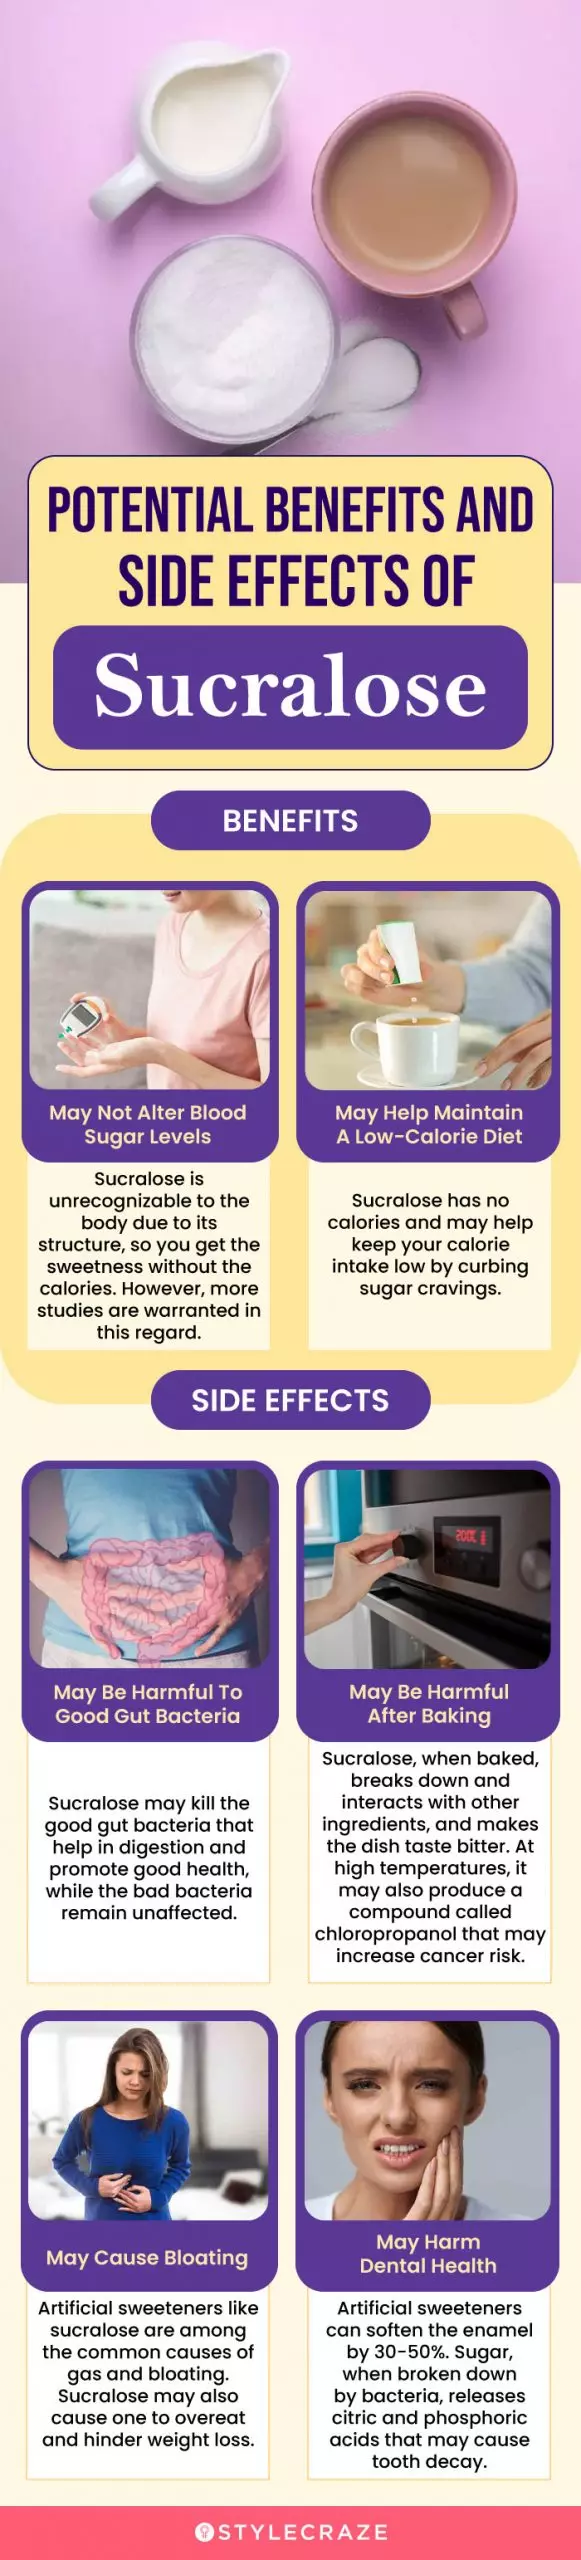 potential benefits and side effects of sucralose (infographic)